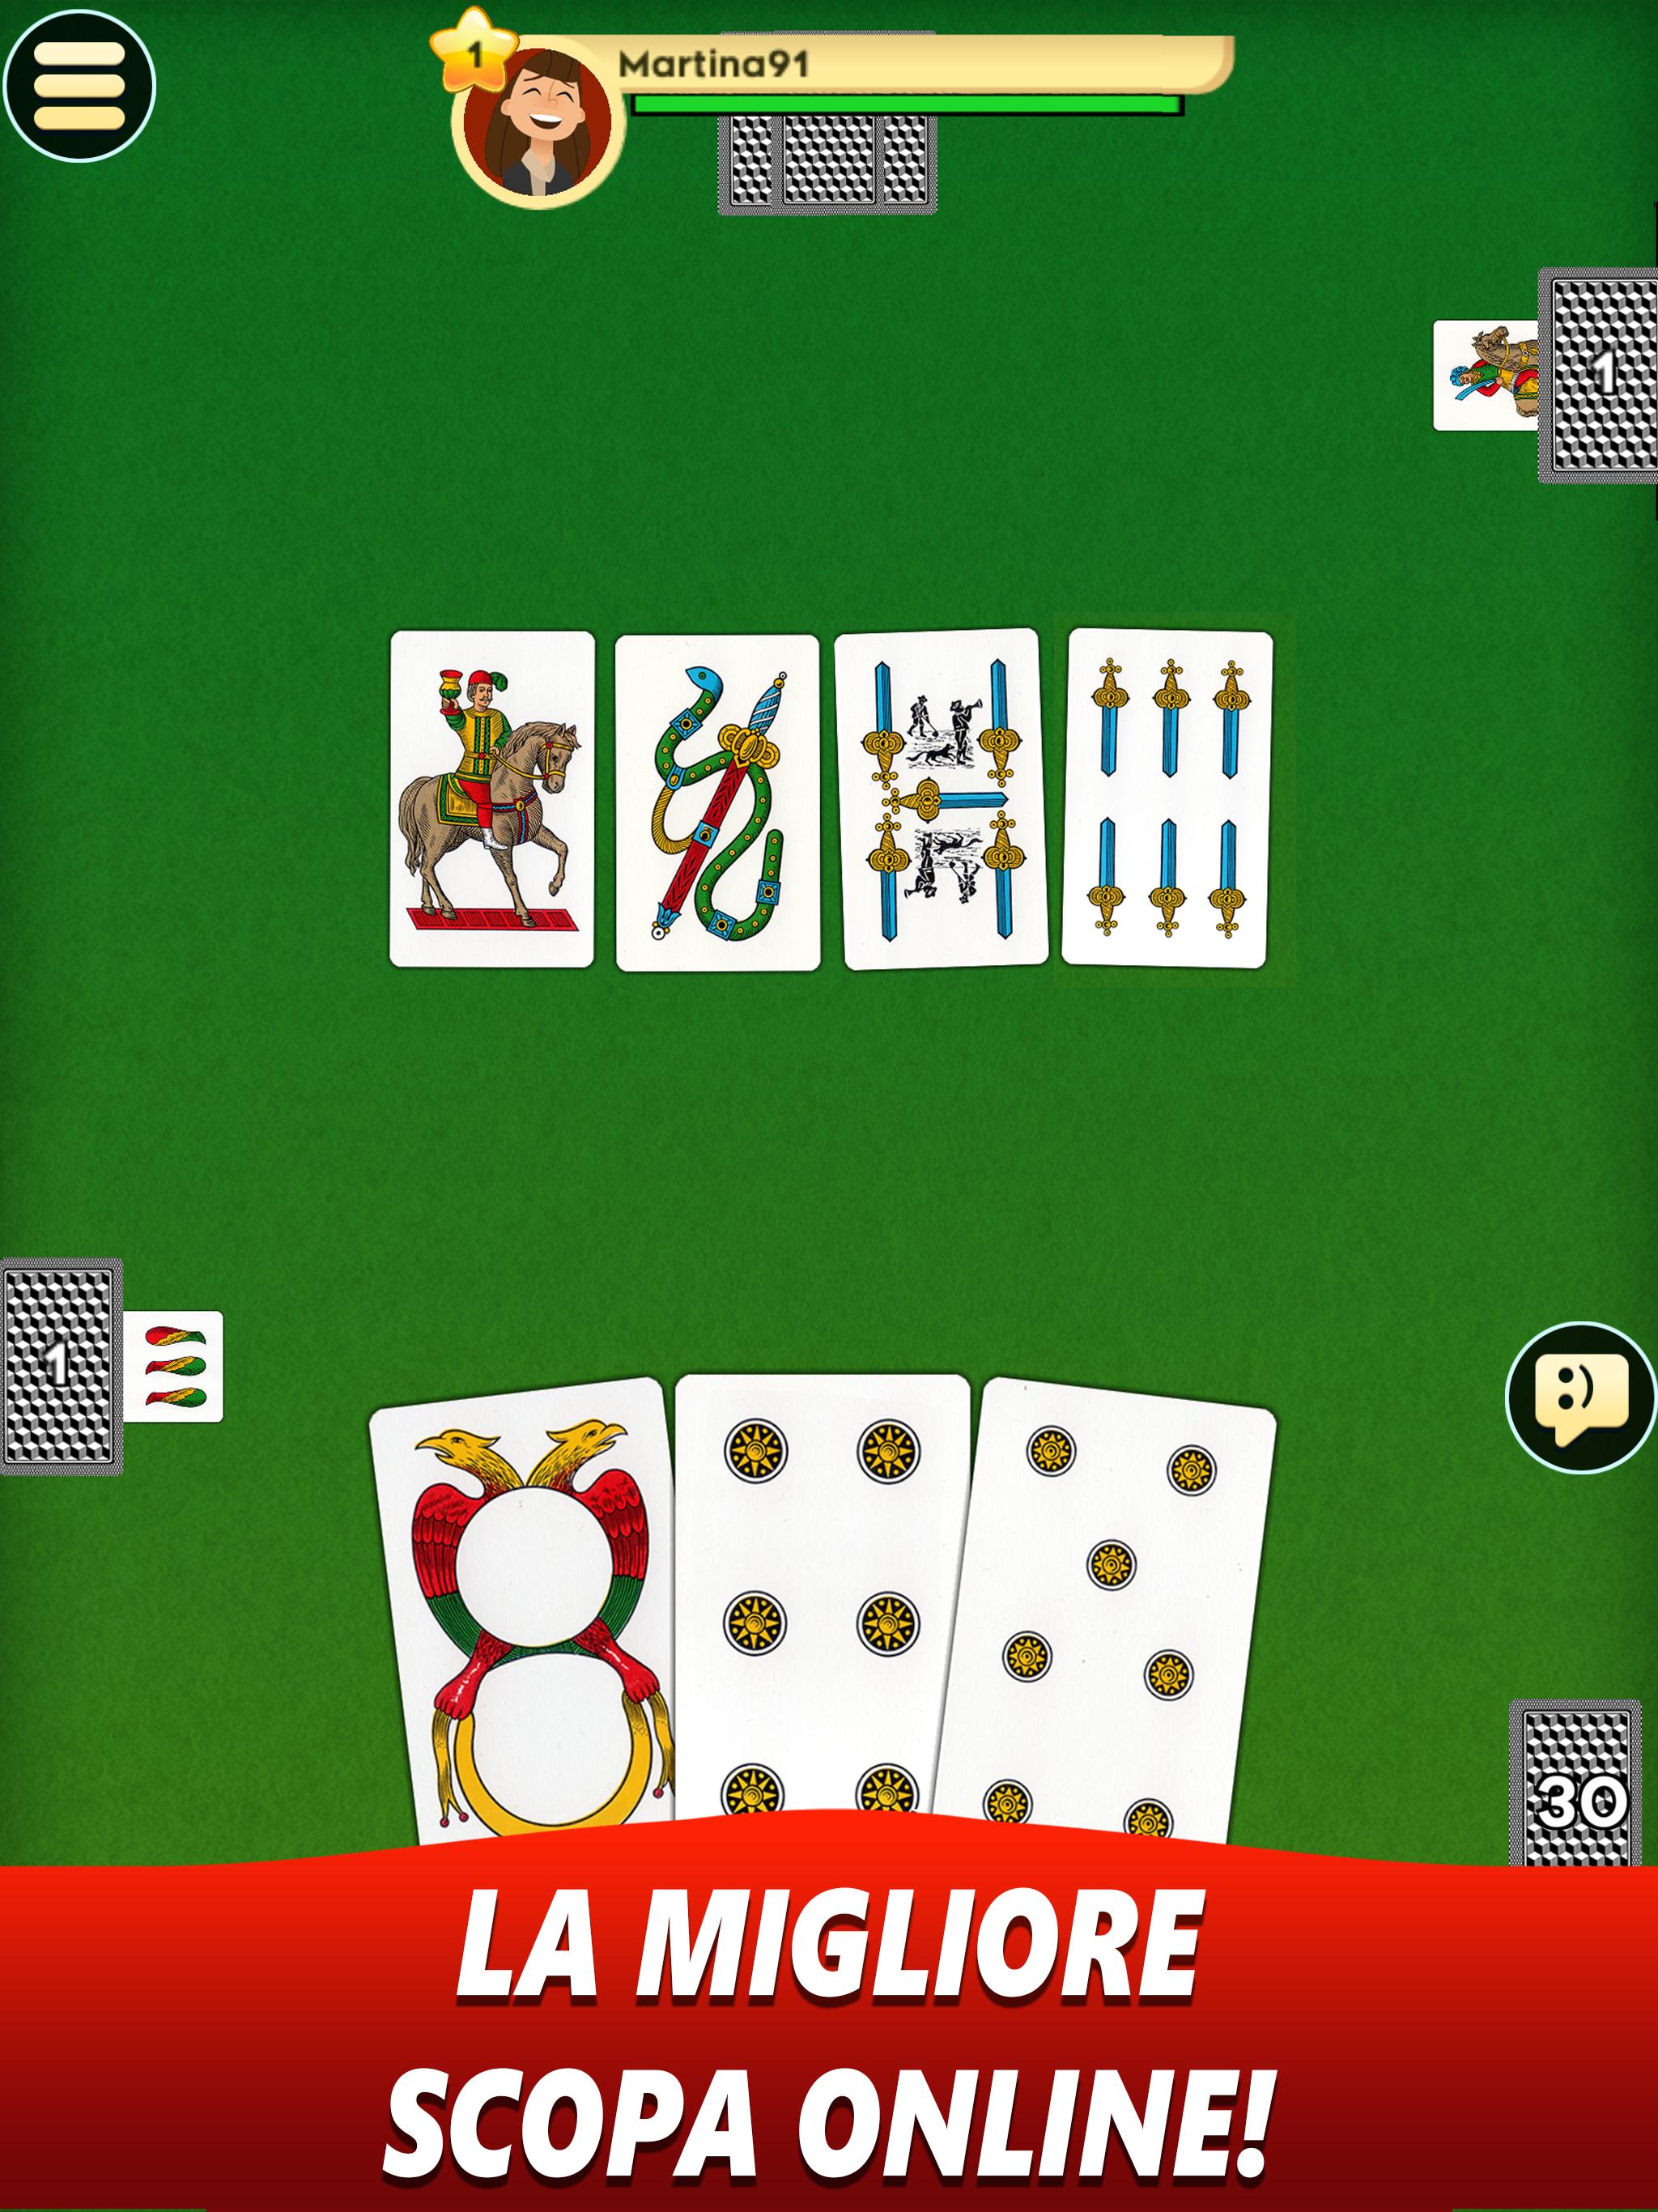 Scopa Online for Android - APK Download